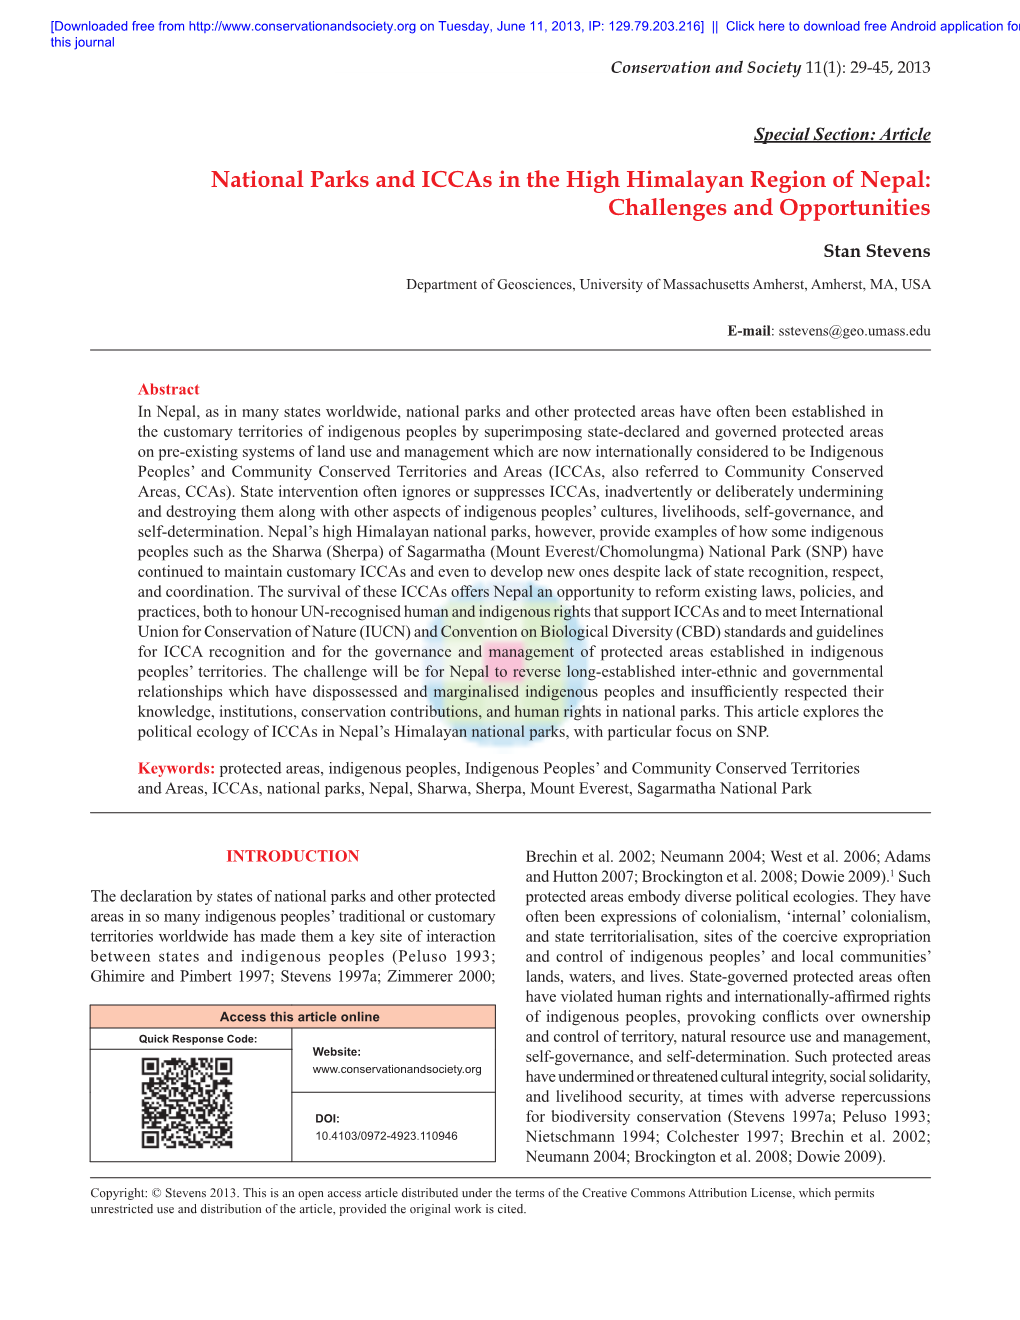 National Parks and Iccas in the High Himalayan Region of Nepal: Challenges and Opportunities